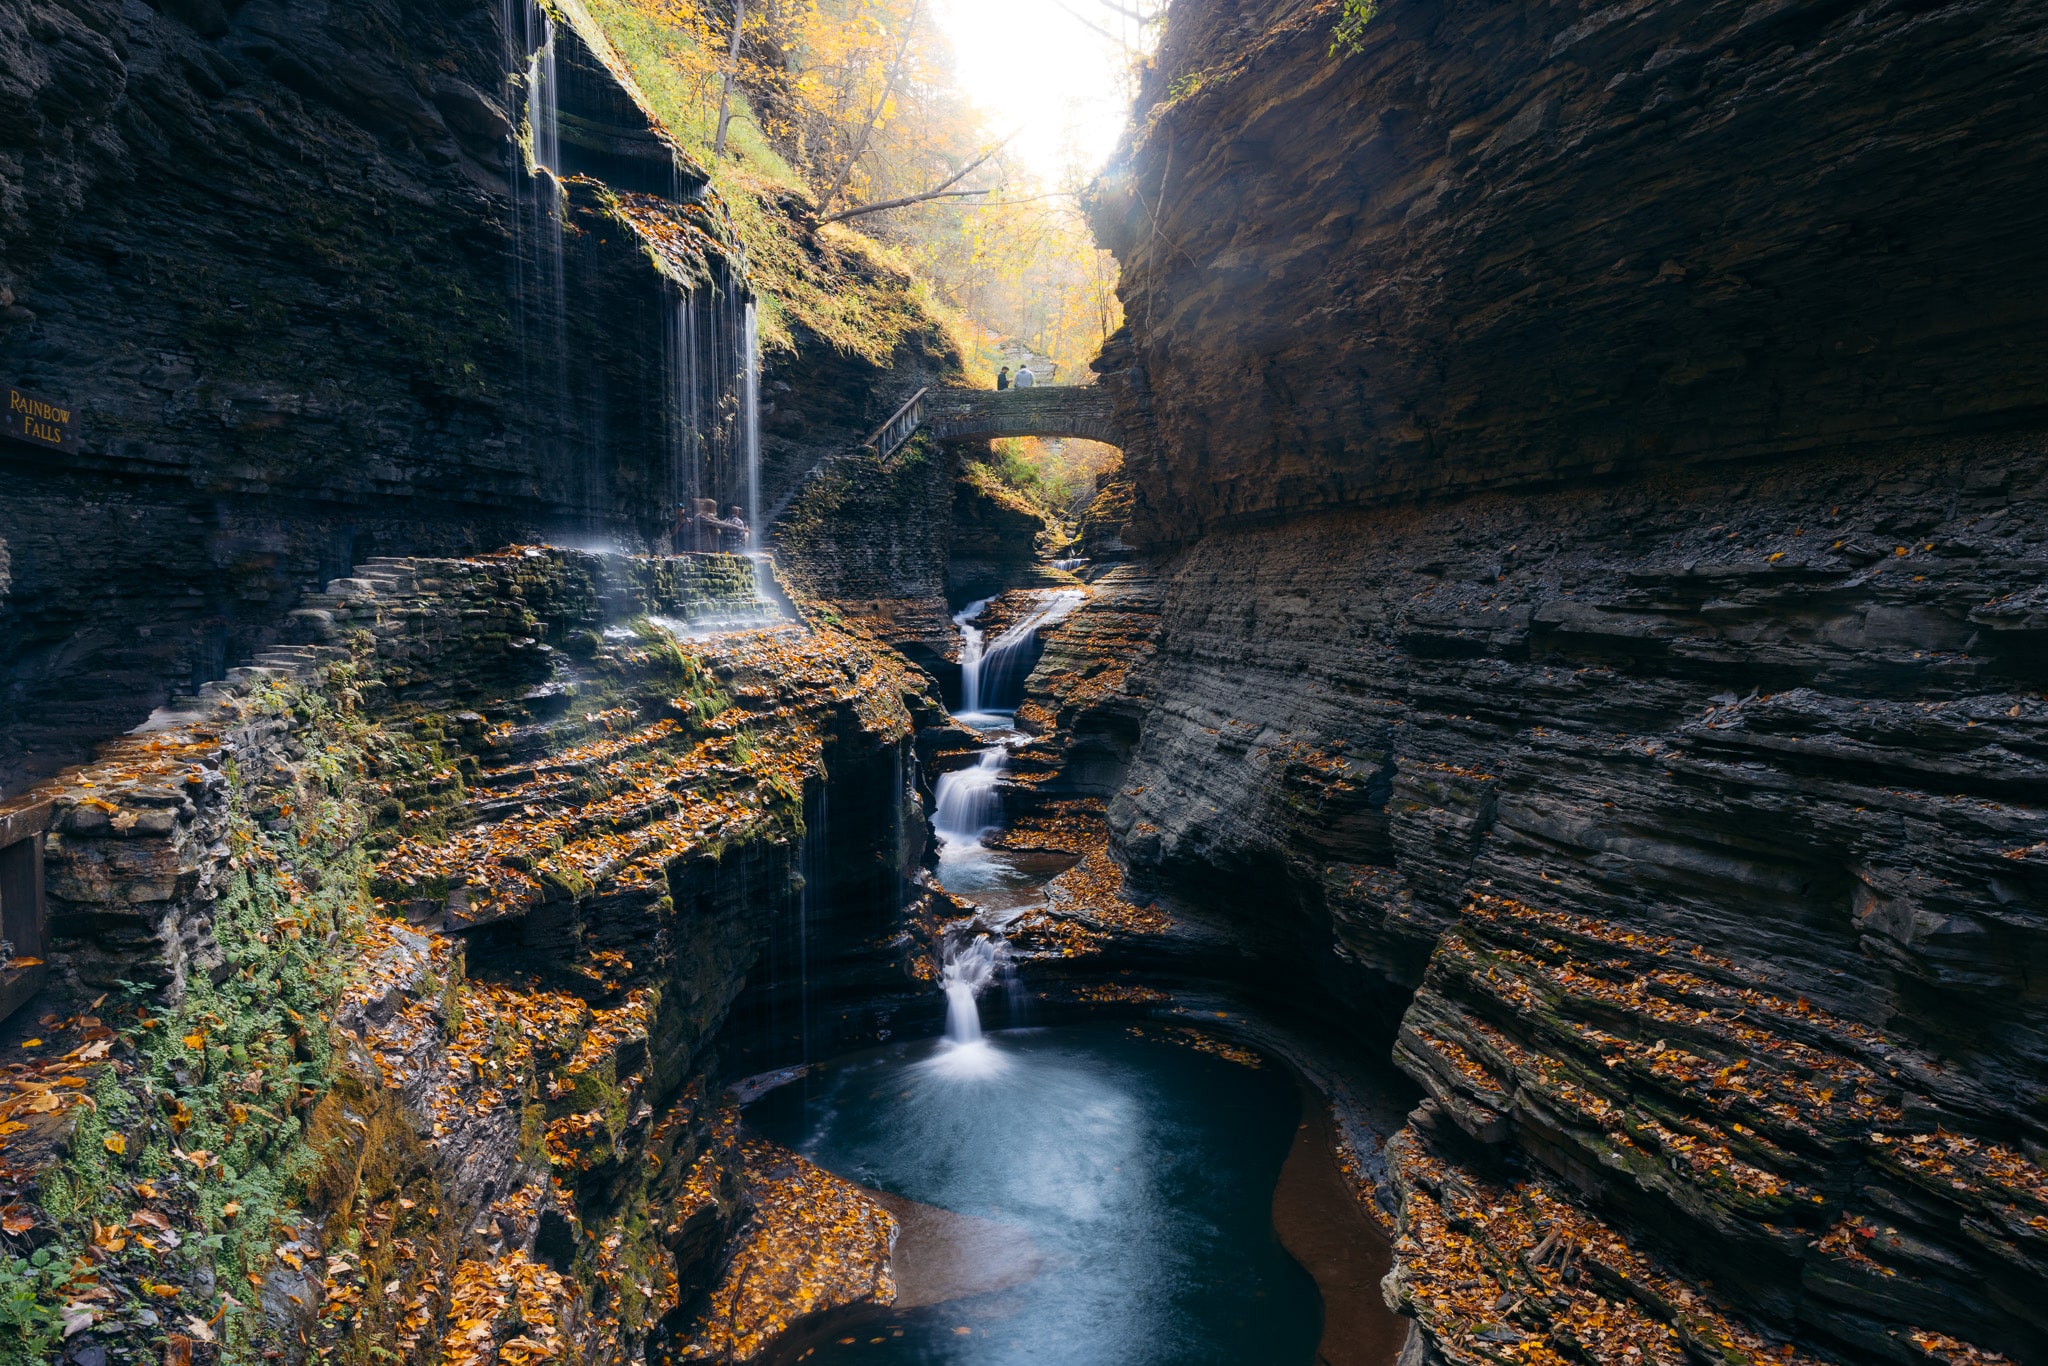 Hiking the Gorge Trail in Watkins Glen State Park, Ithaca New York